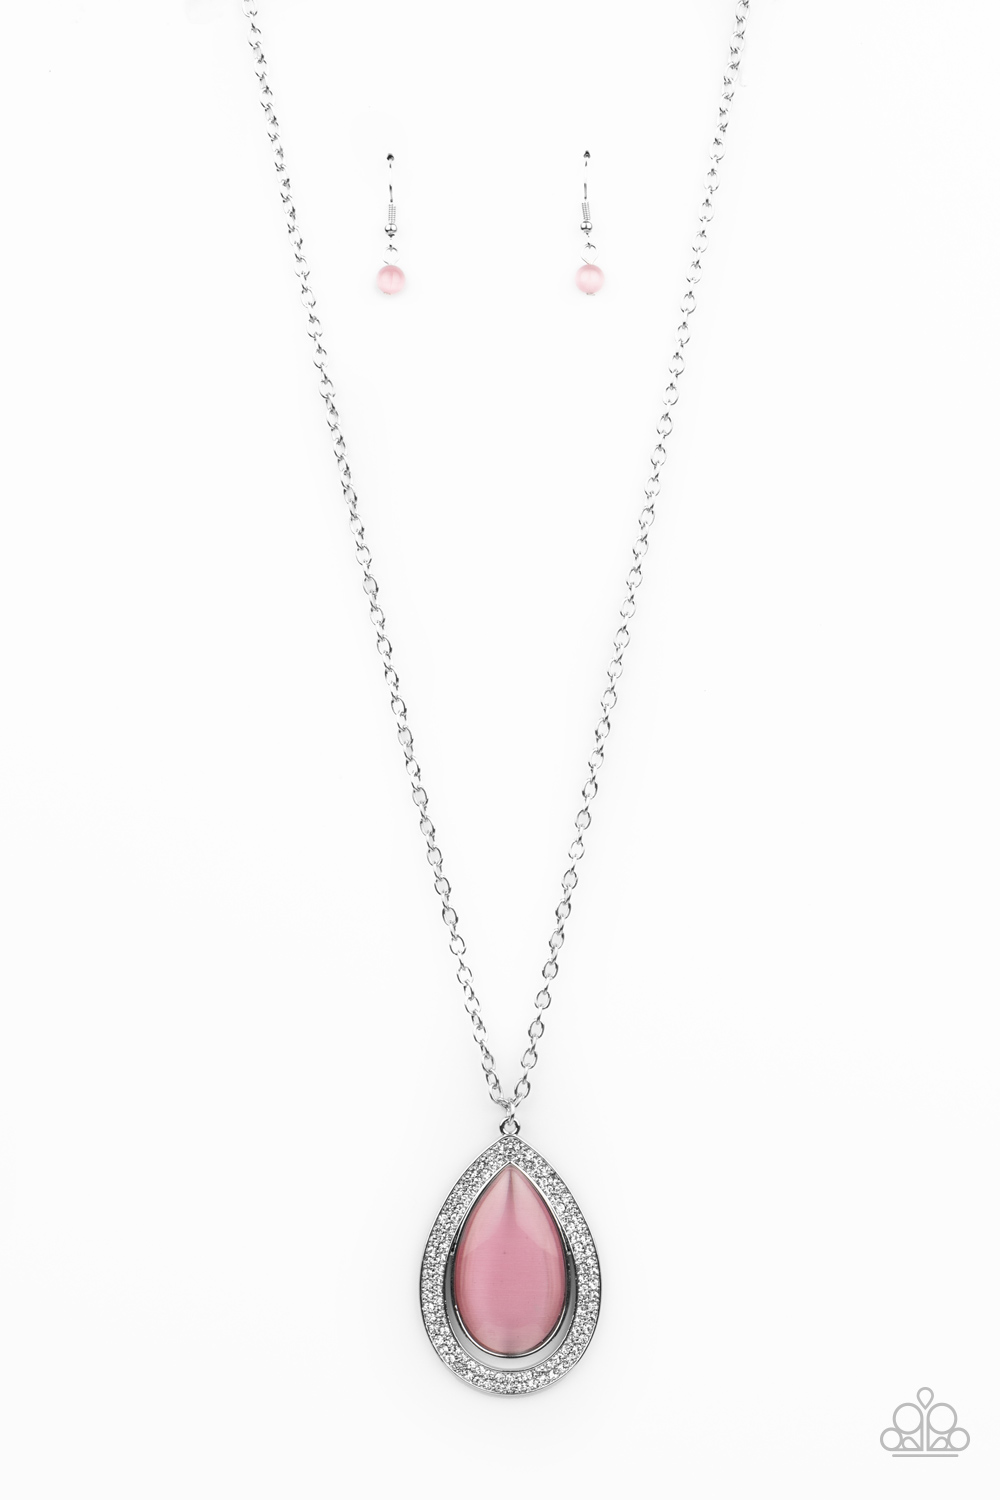 Necklace - You Dropped This - Pink